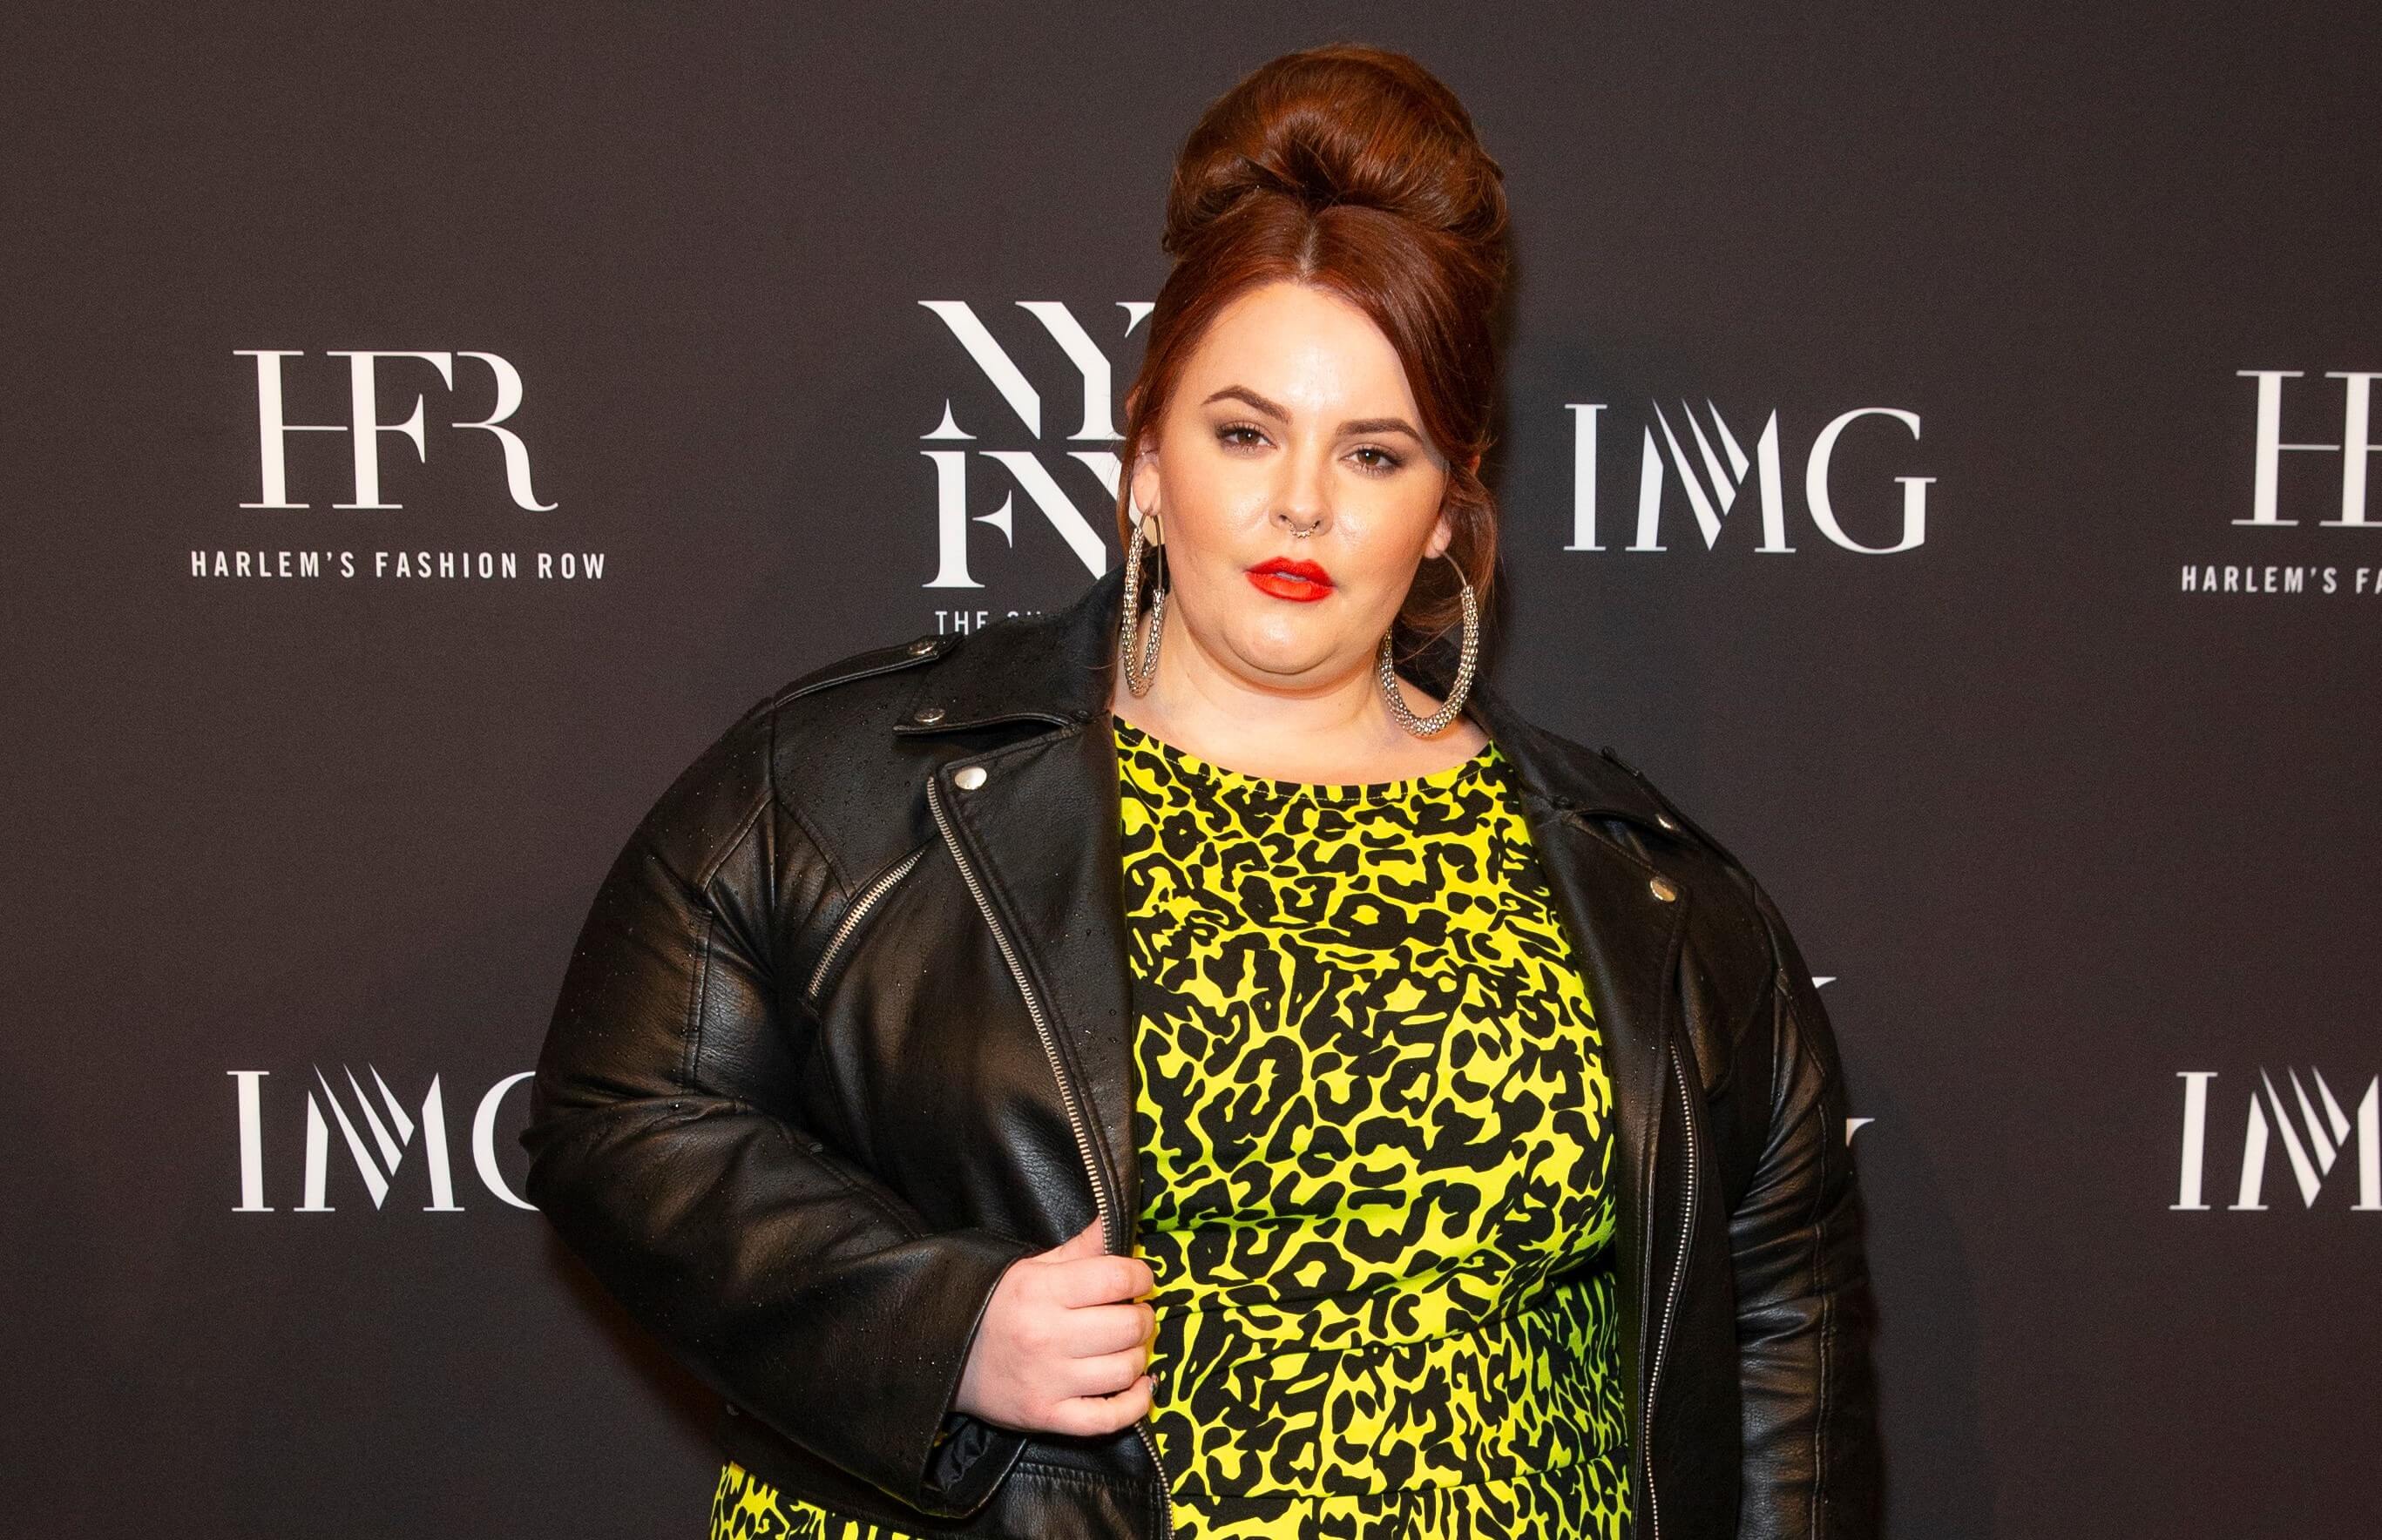 Plus-size model Tess Holliday reveals she is suffering from anorexia